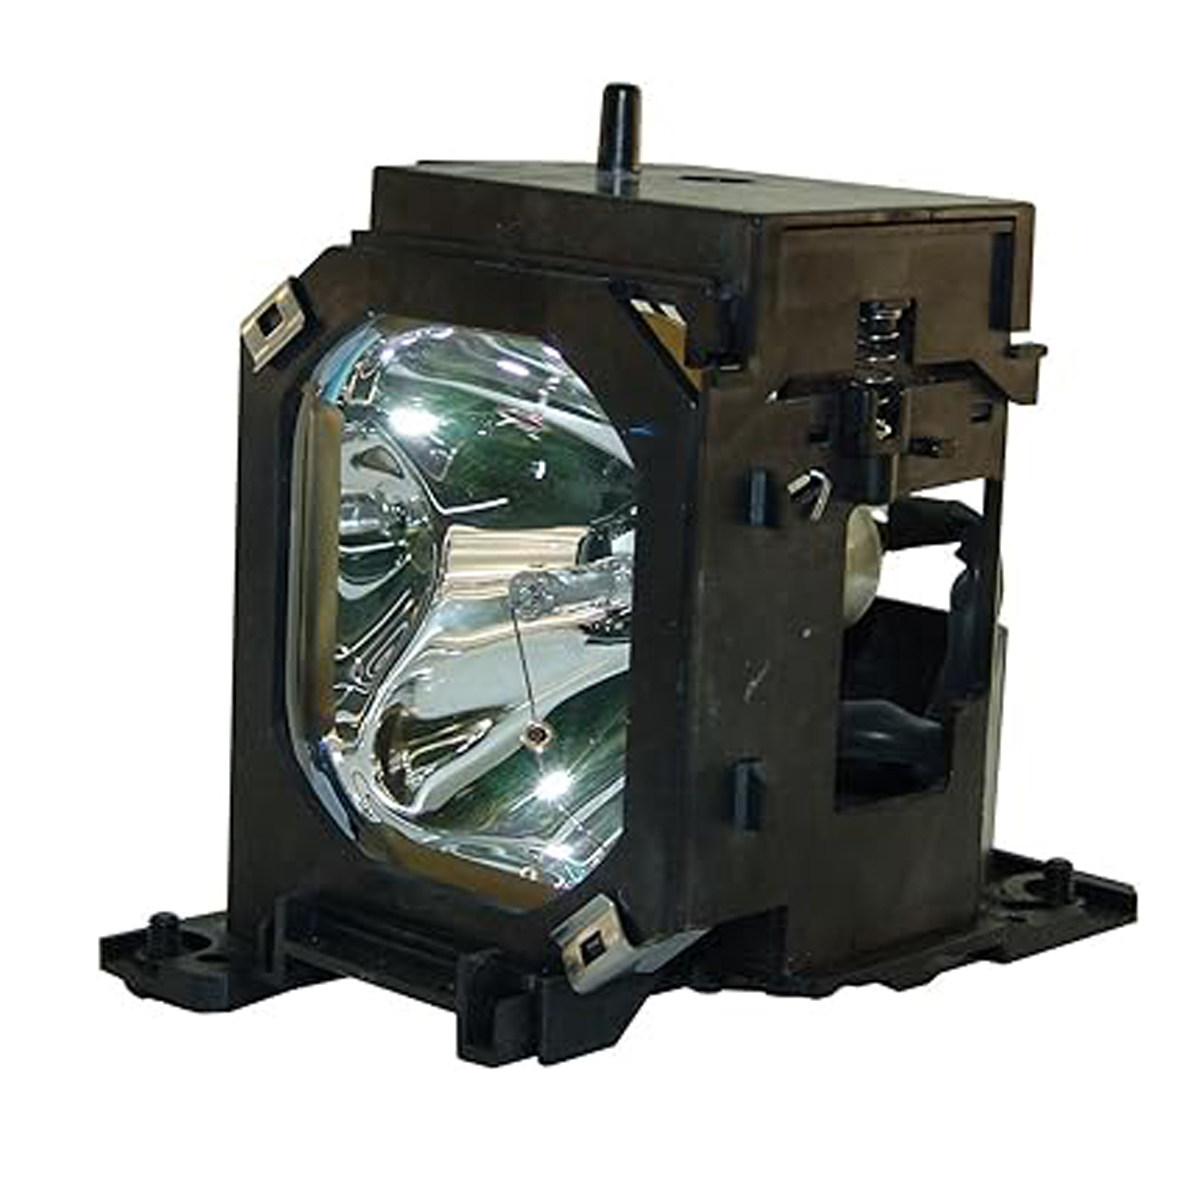 Replacement Projector lamp ELPLP12 For Epson EMP -5600 EMP-7600 EMP-7700